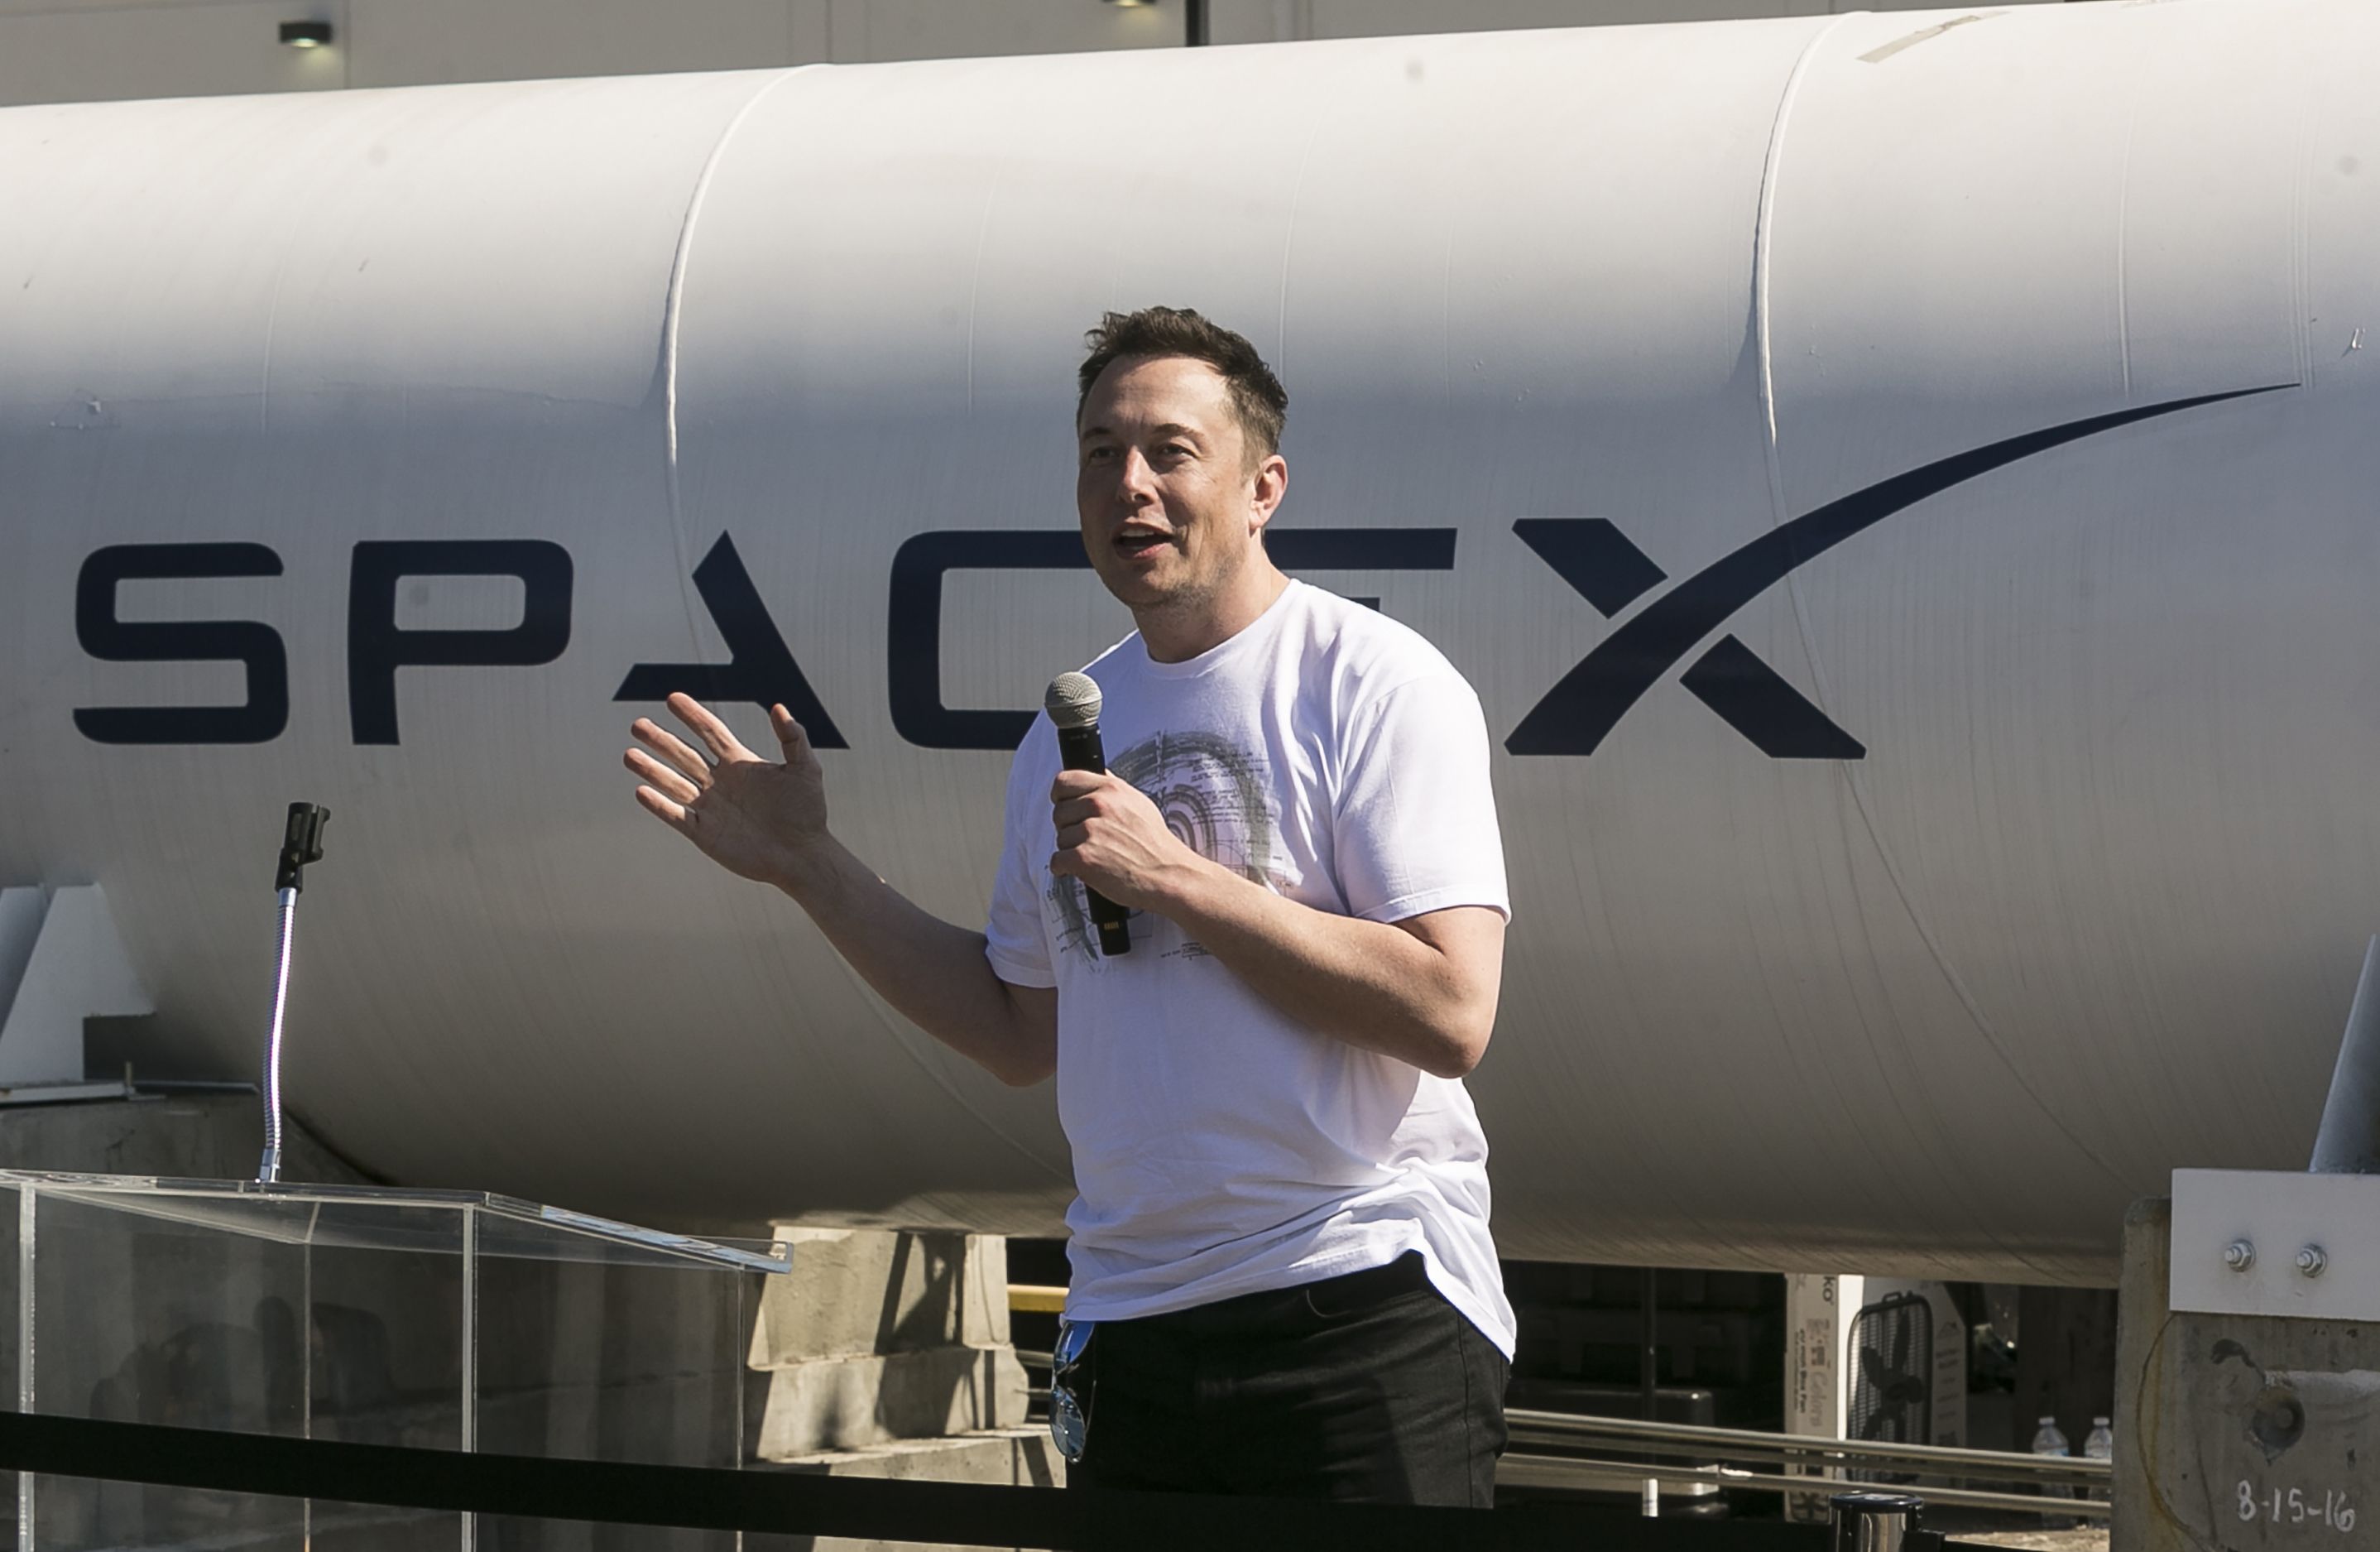 Elon Musk Founded SpaceX, Boring Co Without a Business Model | Money